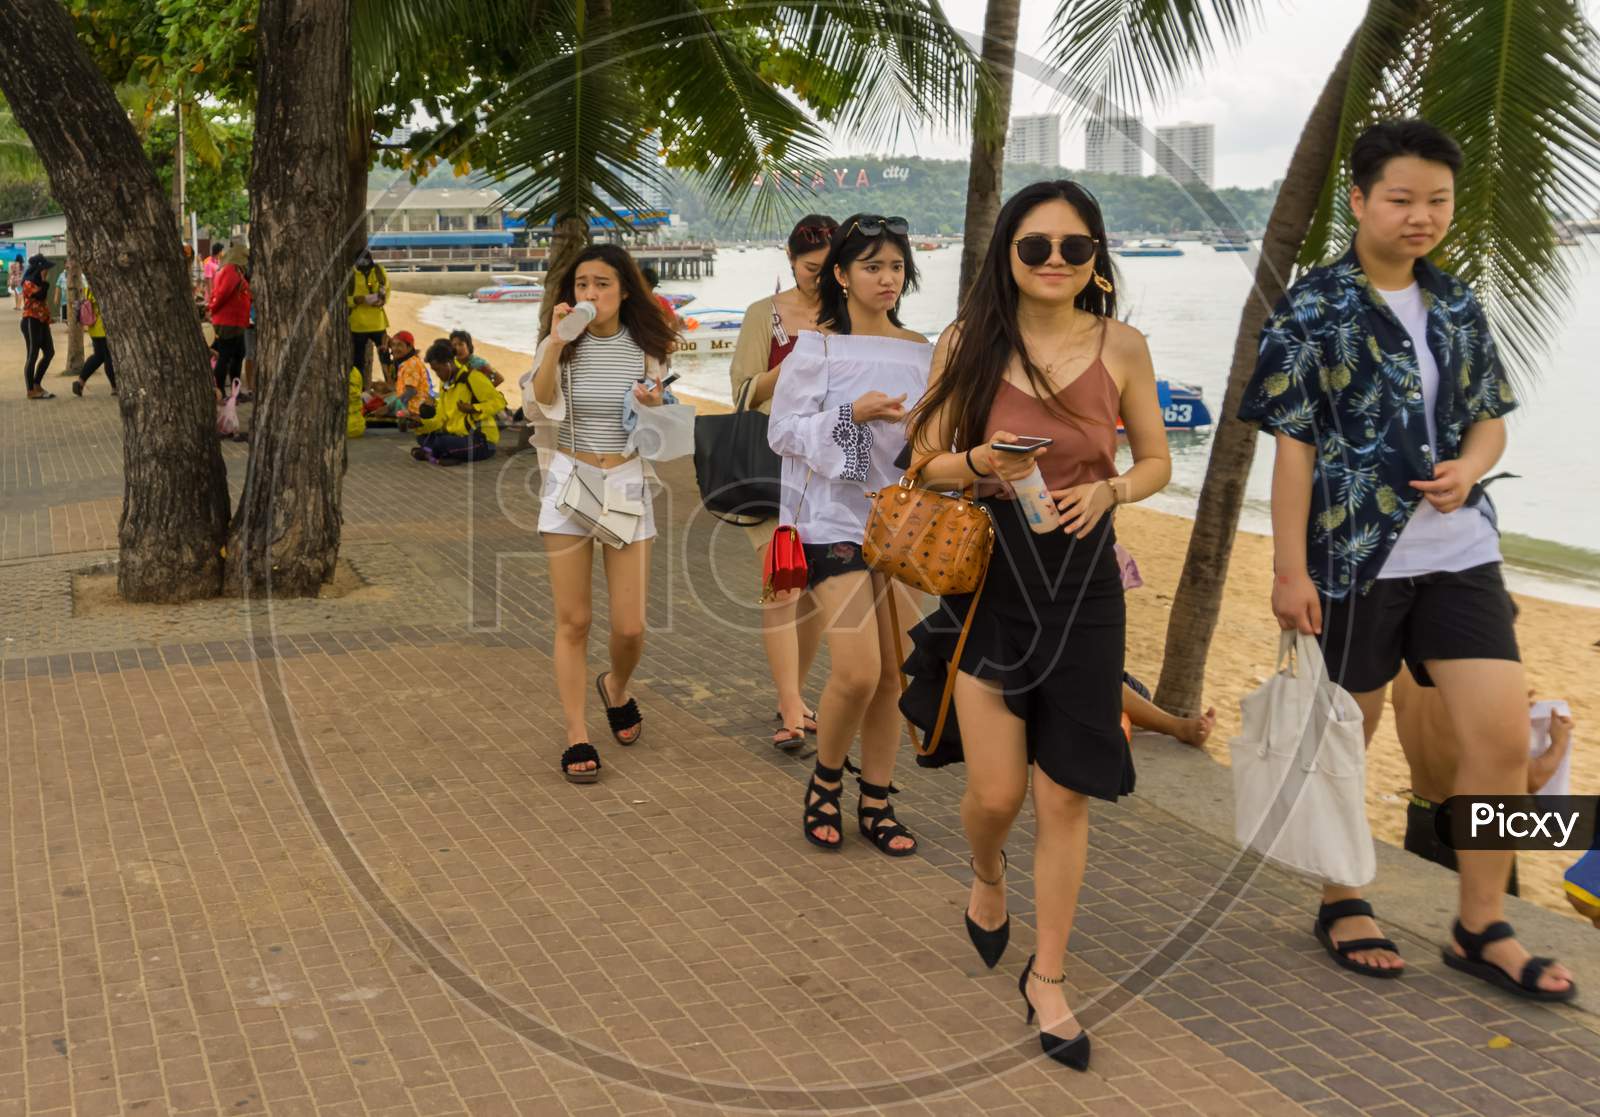 Pattaya,Thailand - April 17,2018: The Beach Many Tourists From China Relax And Swim There And Rent Boats For Trips.Some Thai People Sell Souvenirs,Food And Drinks To Them.